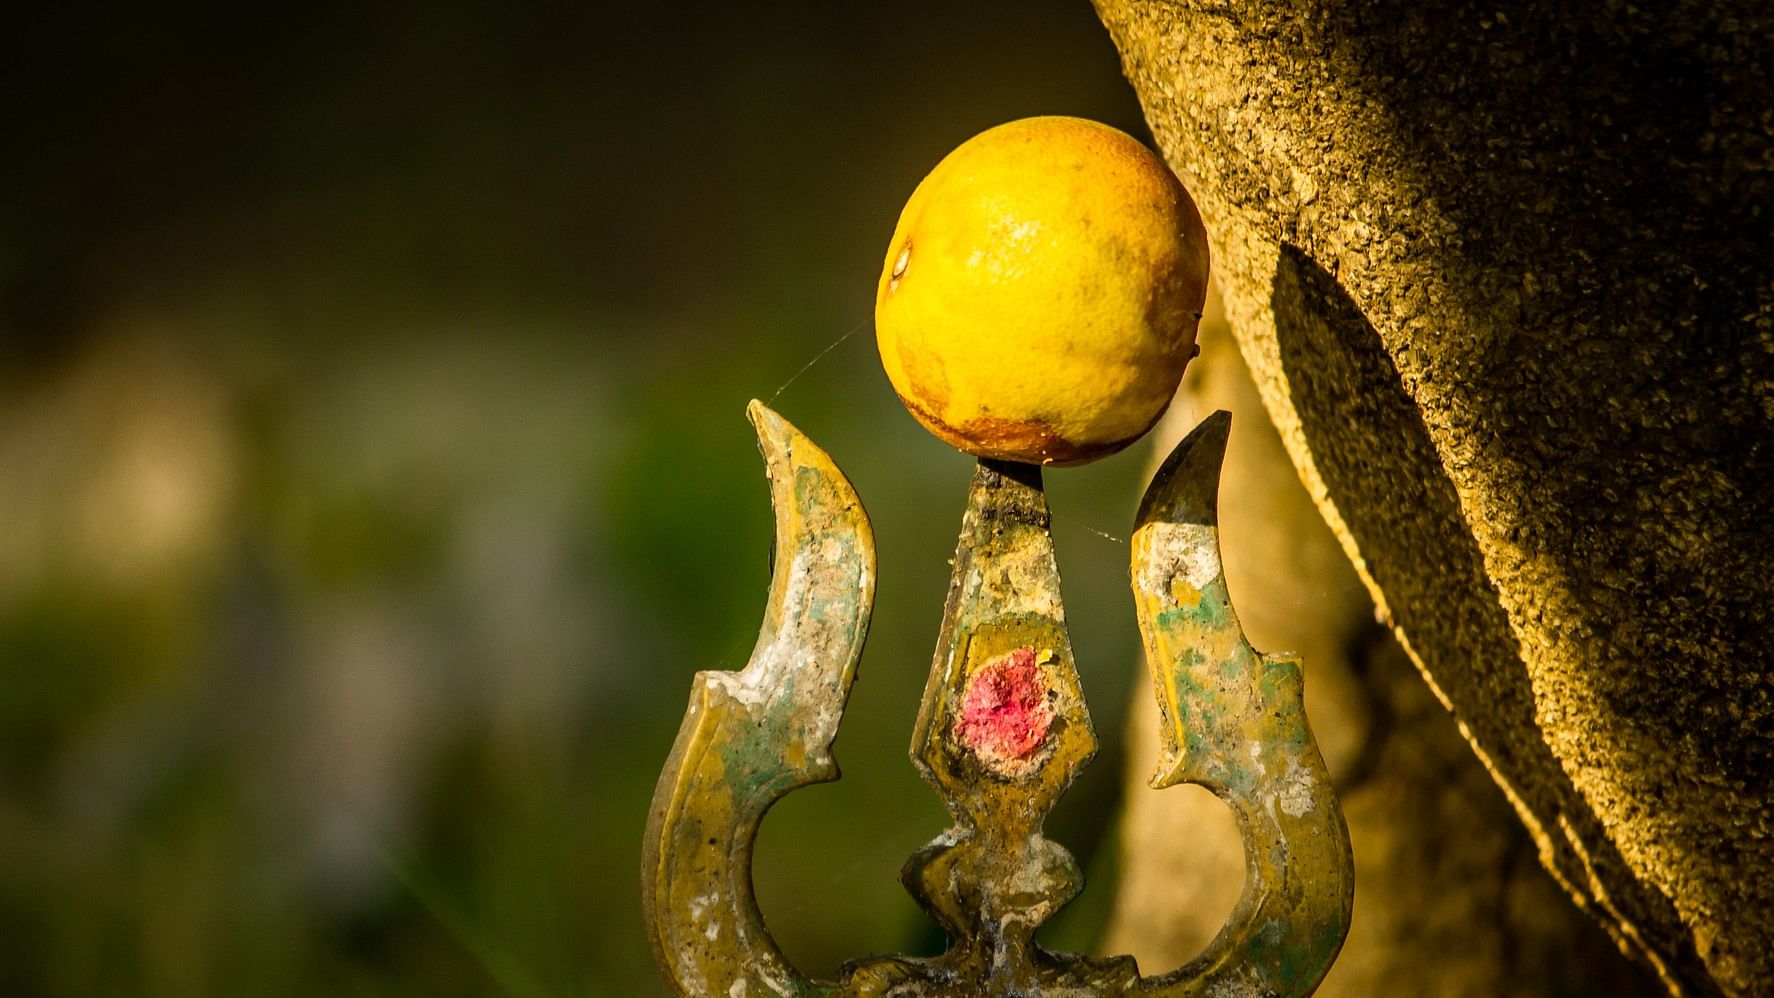 <div class="paragraphs"><p>Over the nine days of the festival, temple priests spike a lemon on the spear each day and the management auctions them off on the last day. Representative image.</p></div>